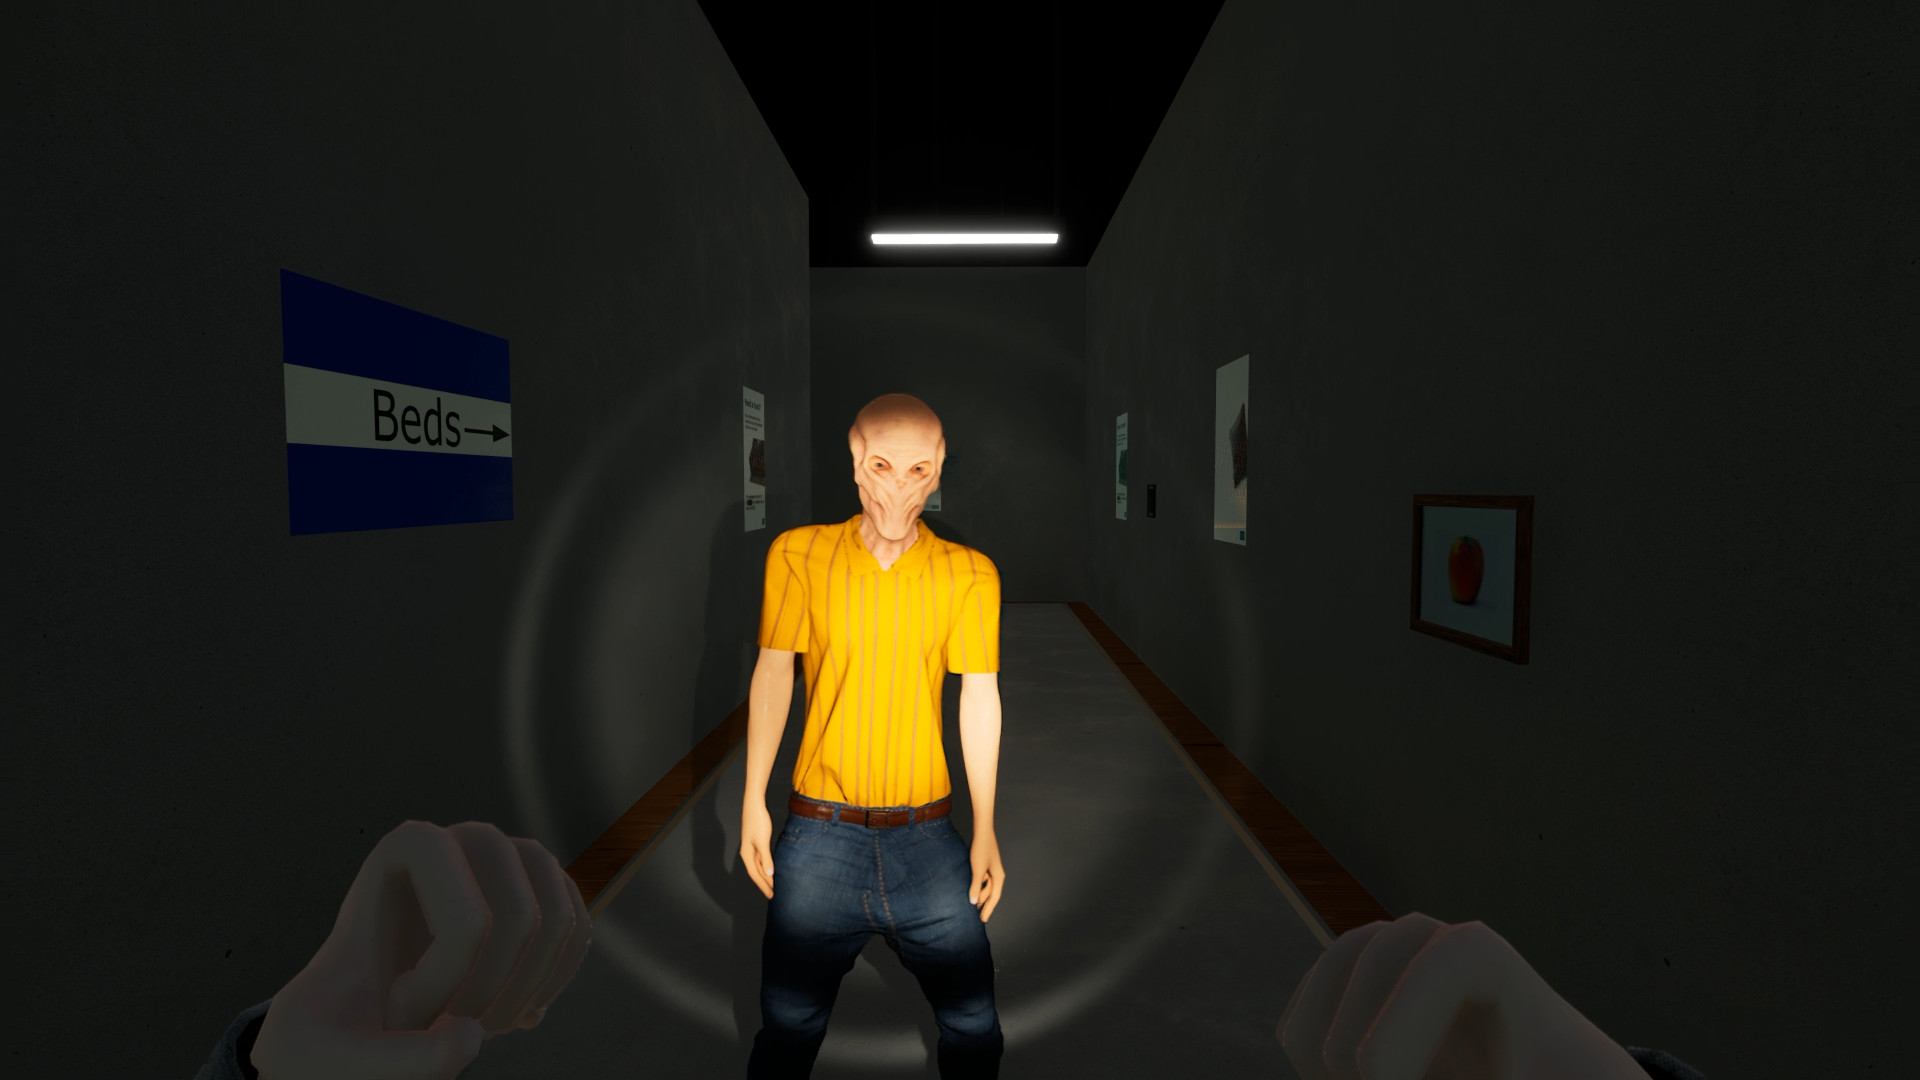 Scp 3008 PC Version Full Game Free Download